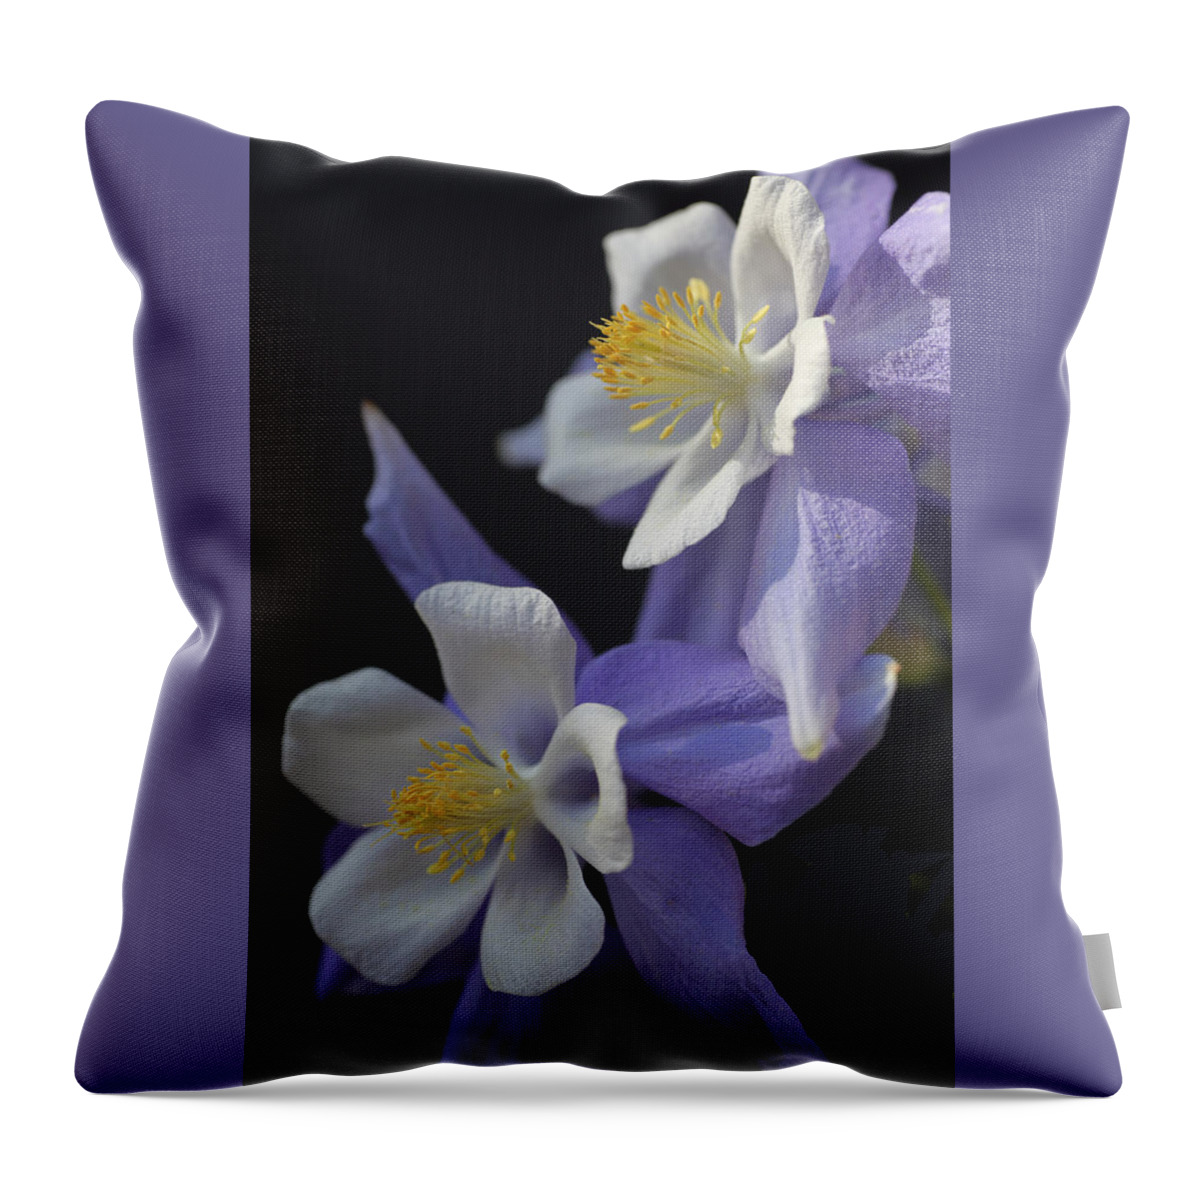 Blue Throw Pillow featuring the photograph Blue Swan Columbine by Tammy Pool